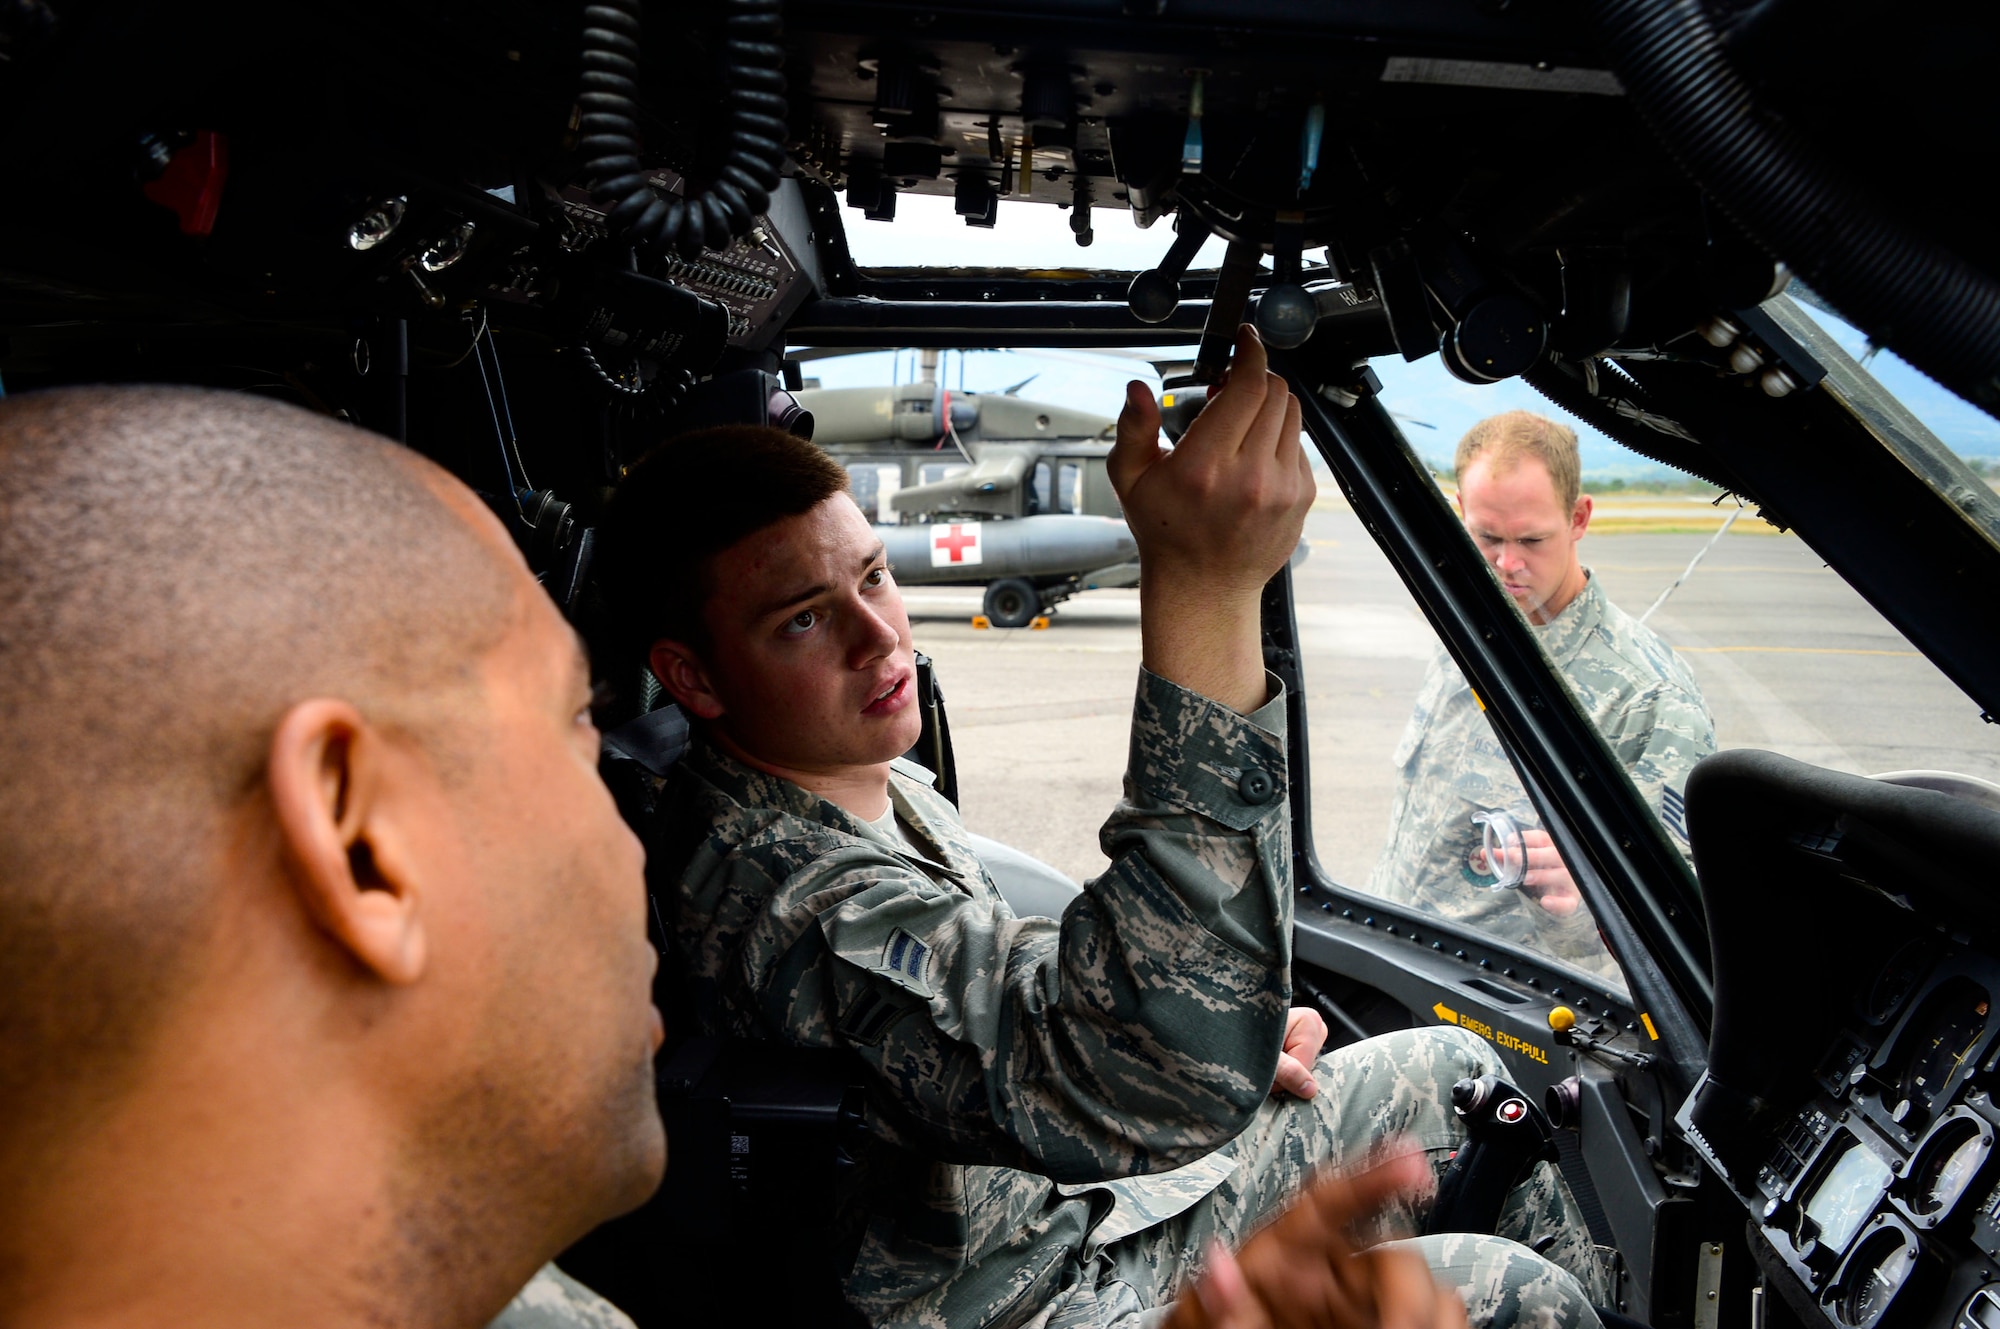 U.S. Air Force Airman 1st Class Andrew Divine, 612th Air Base Squadron firefighter, reviews the proper procedures of shutting down a UH-60 Blackhawk helicopter with U.S. Army Chief Warrant Officer 4 Ronald Rodgers, 1-228th Aviation Regiment battalion safety officer, at Soto Cano Air Base, Honduras, Jan. 15, 2015.  At least once a quarter, the 612th ABS teams up with the 1-228th Avn. Reg. to review aircraft crash rescue training and emergency procedures for the UH-60 Blackhawk helicopter. (U.S. Air Force photo/Tech. Sgt. Heather Redman)